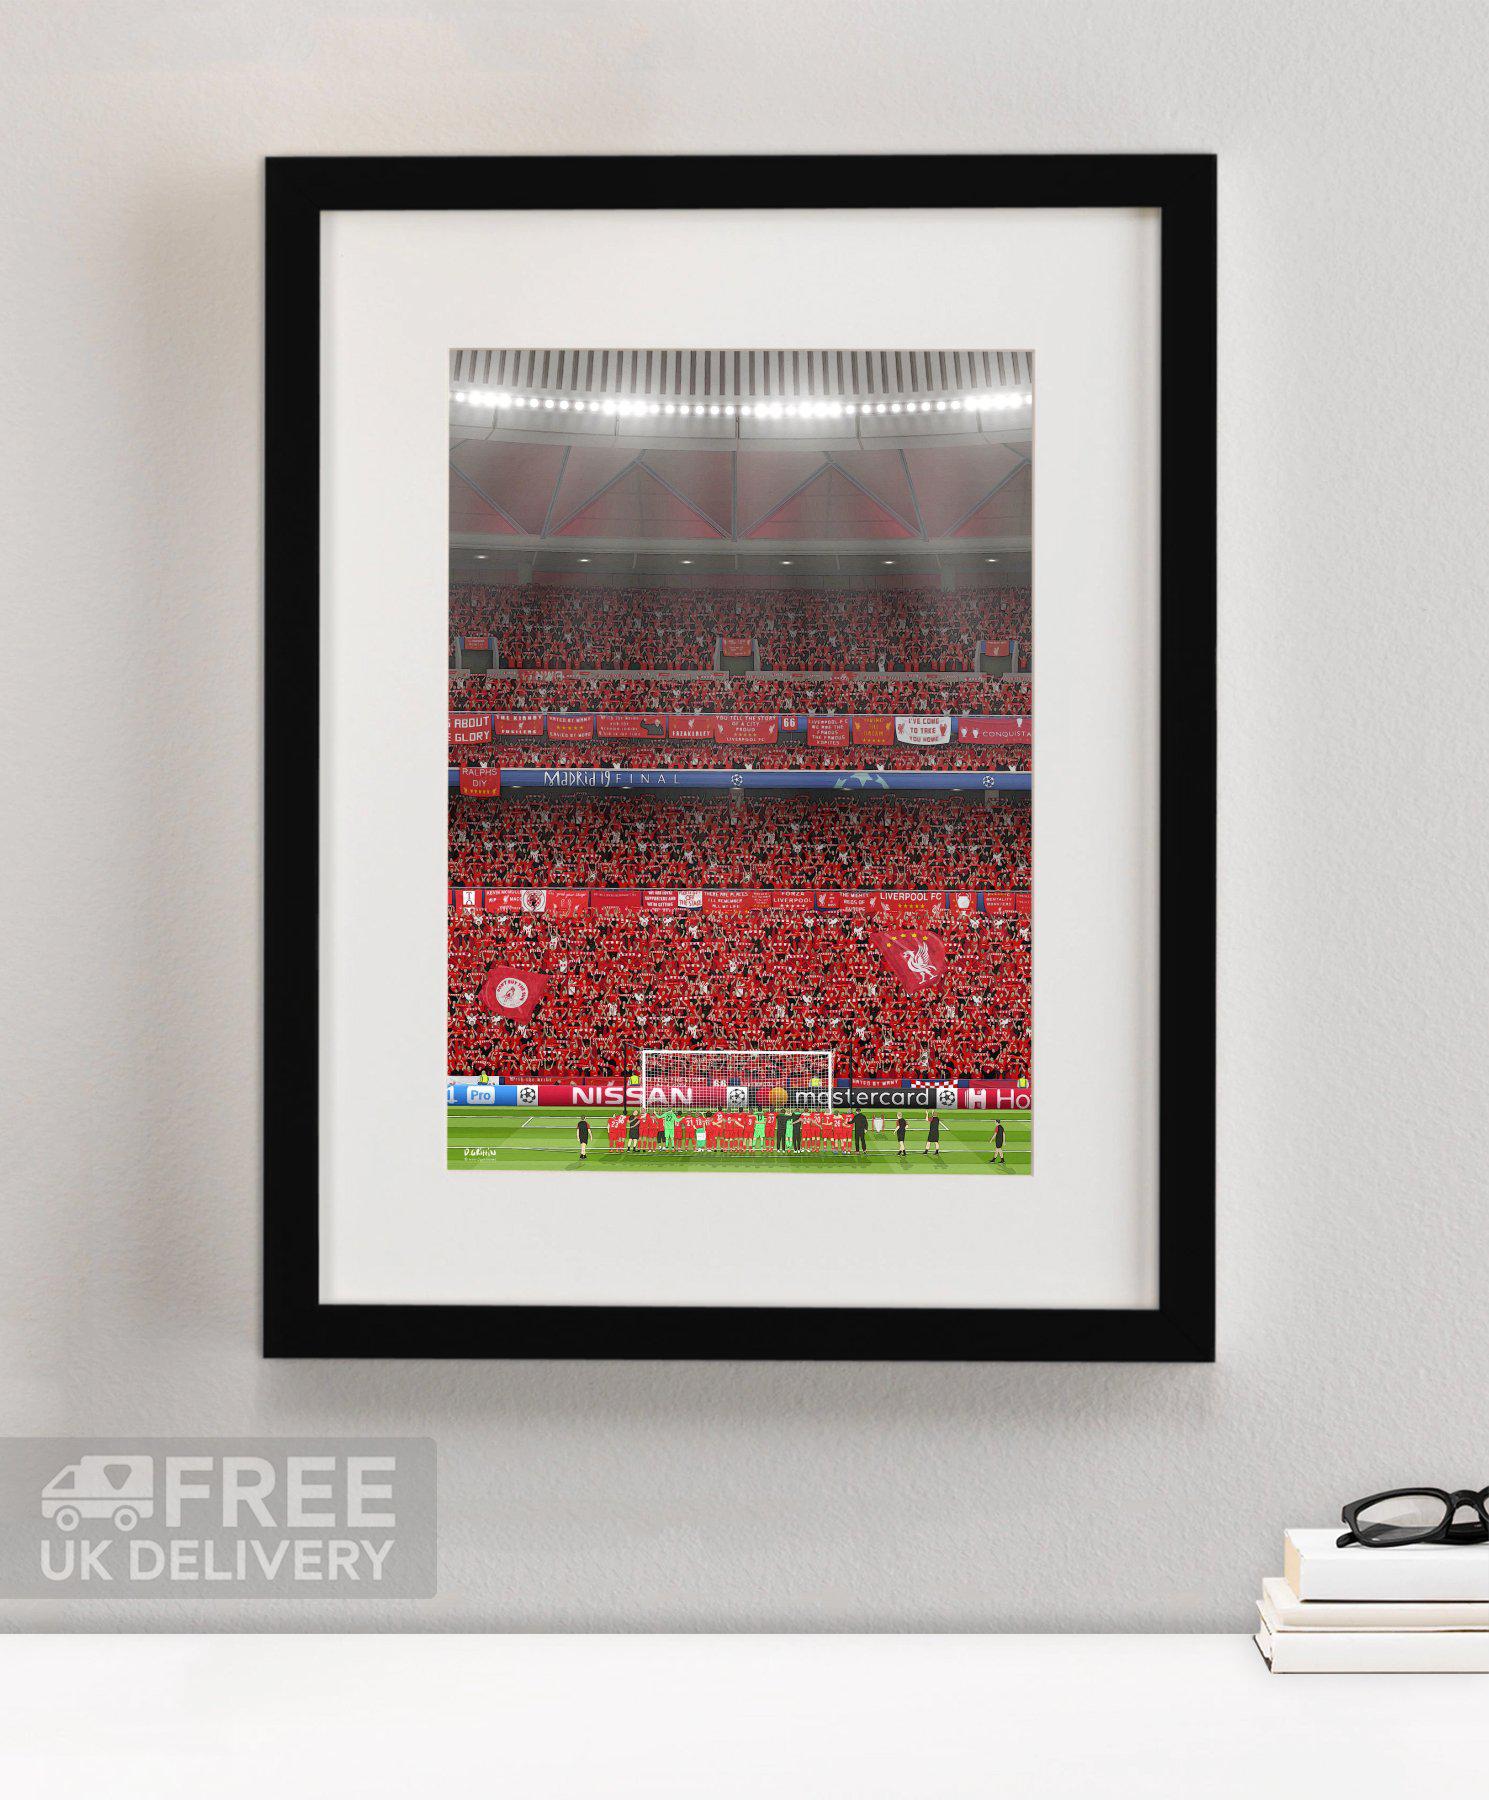 Liverpool Champions League Winners 2019 Print - North Section